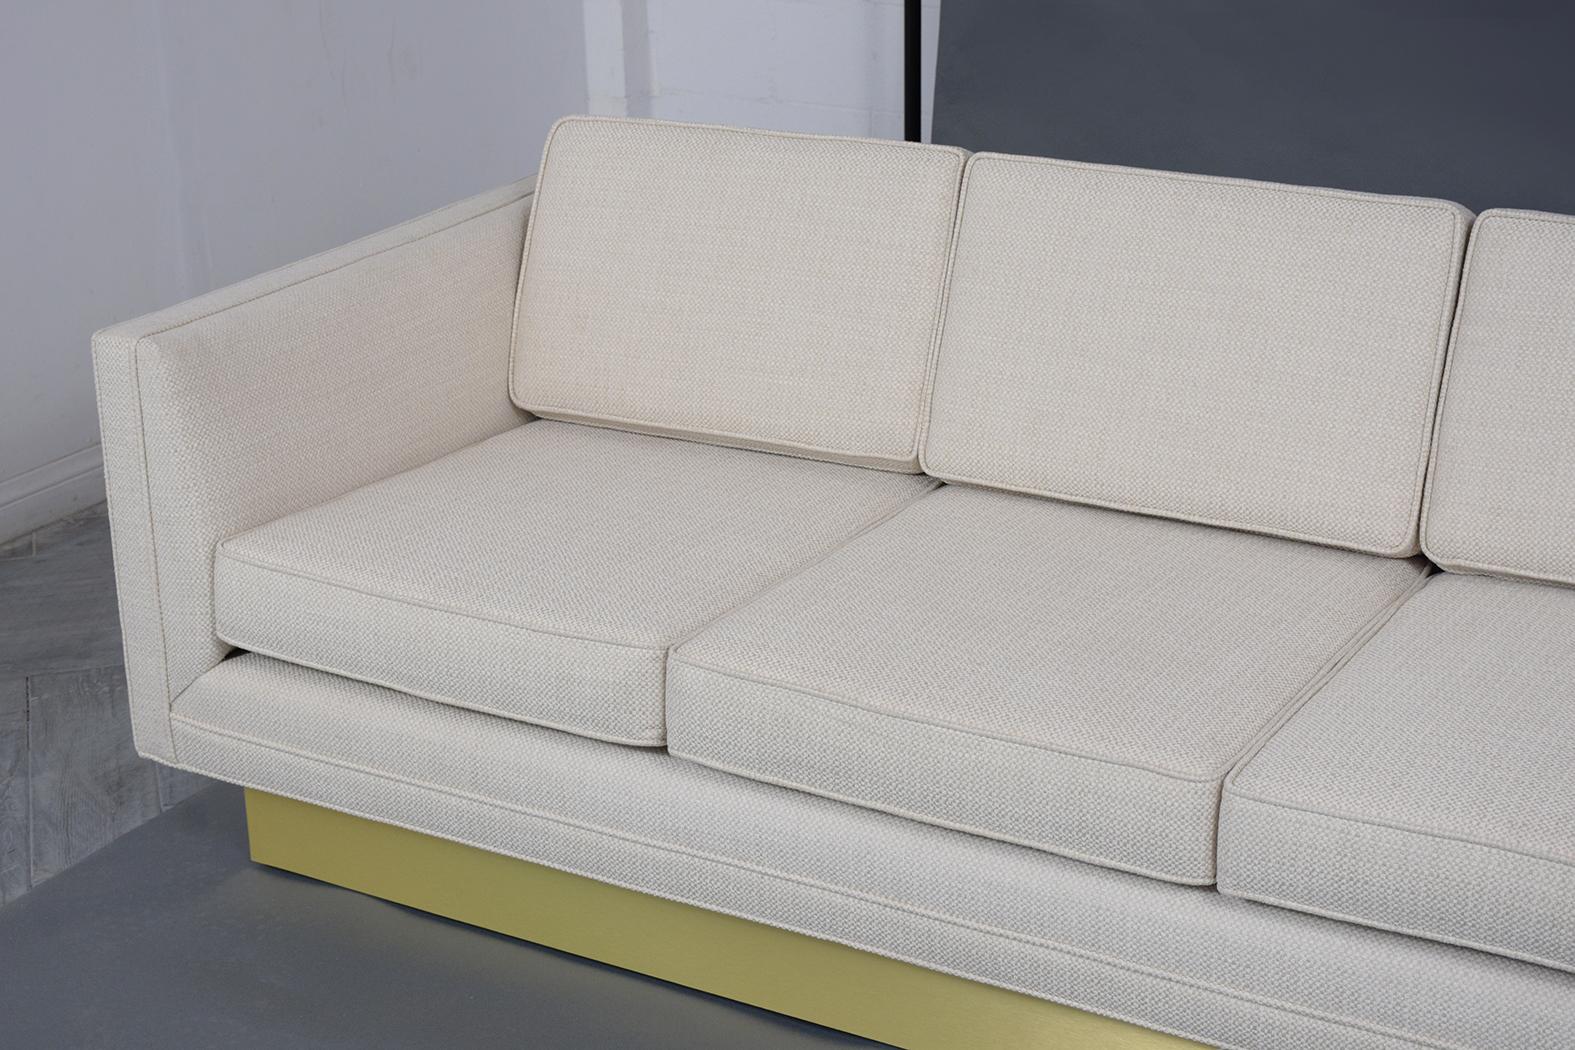 American Restored Vintage Tuxedo-Style Executive Sofa with Brass Elements For Sale